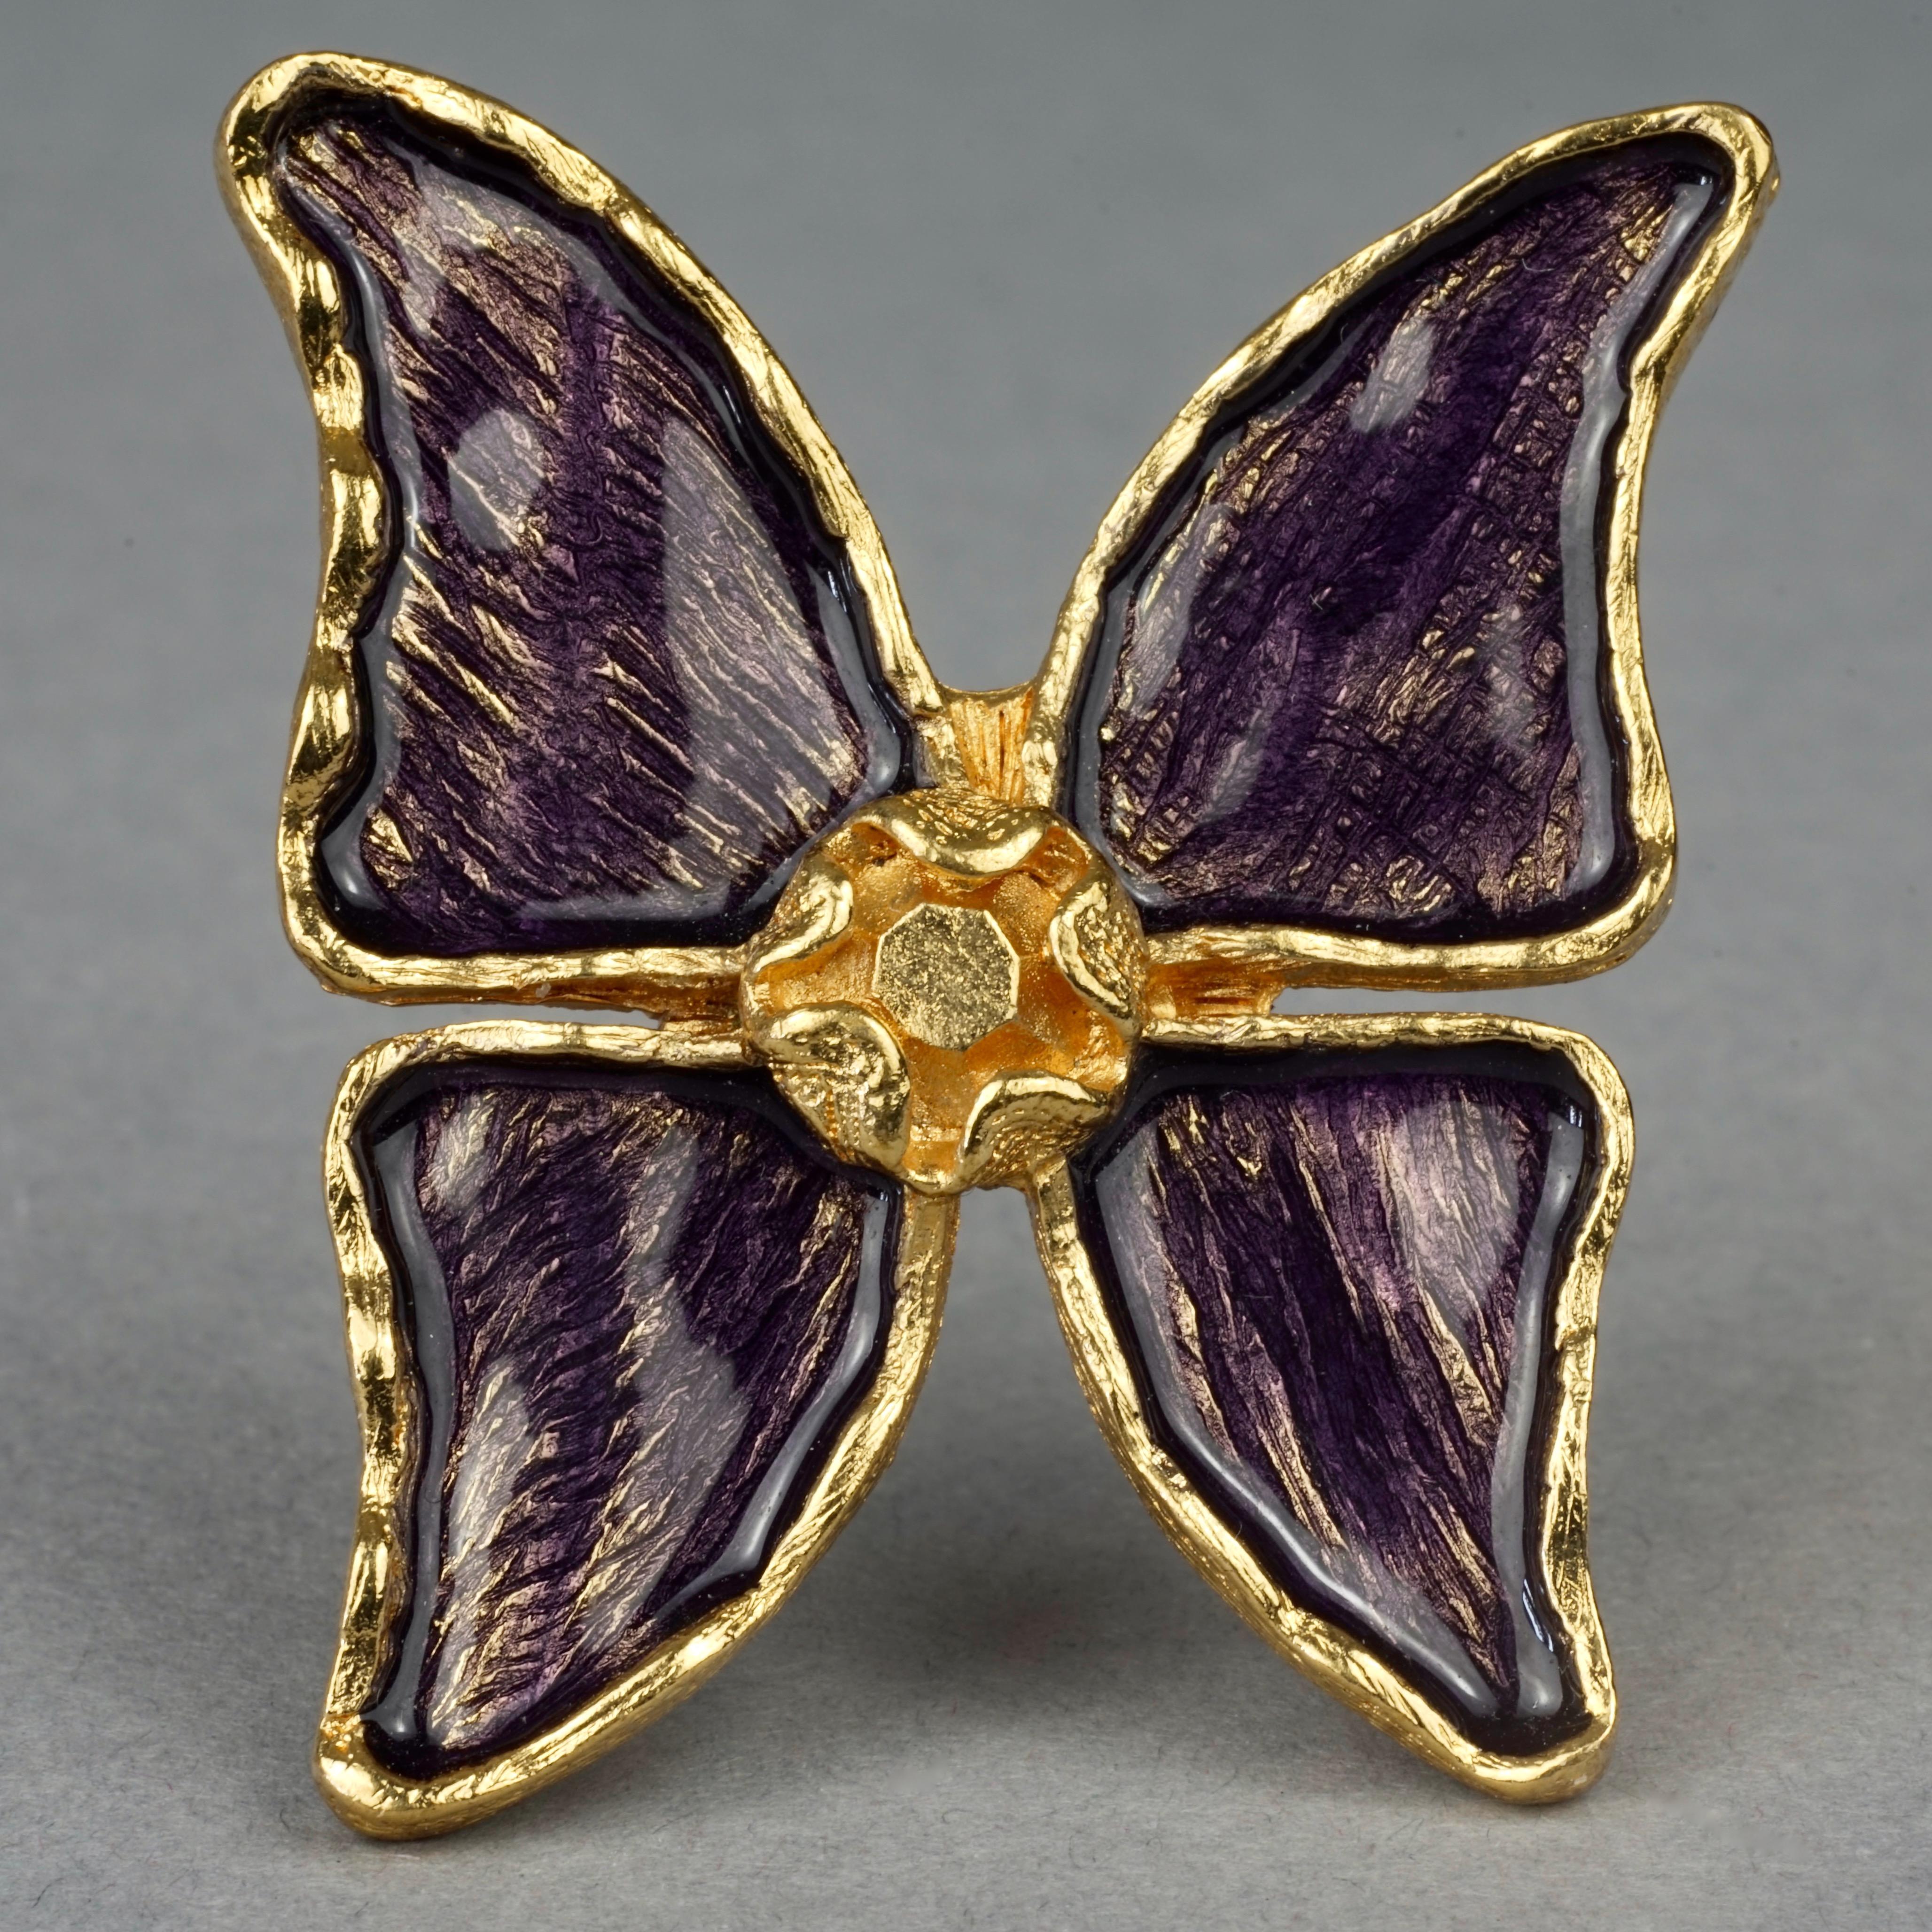 Vintage YVES SAINT LAURENT Ysl Butterfly Enamel Brooch In Excellent Condition For Sale In Kingersheim, Alsace